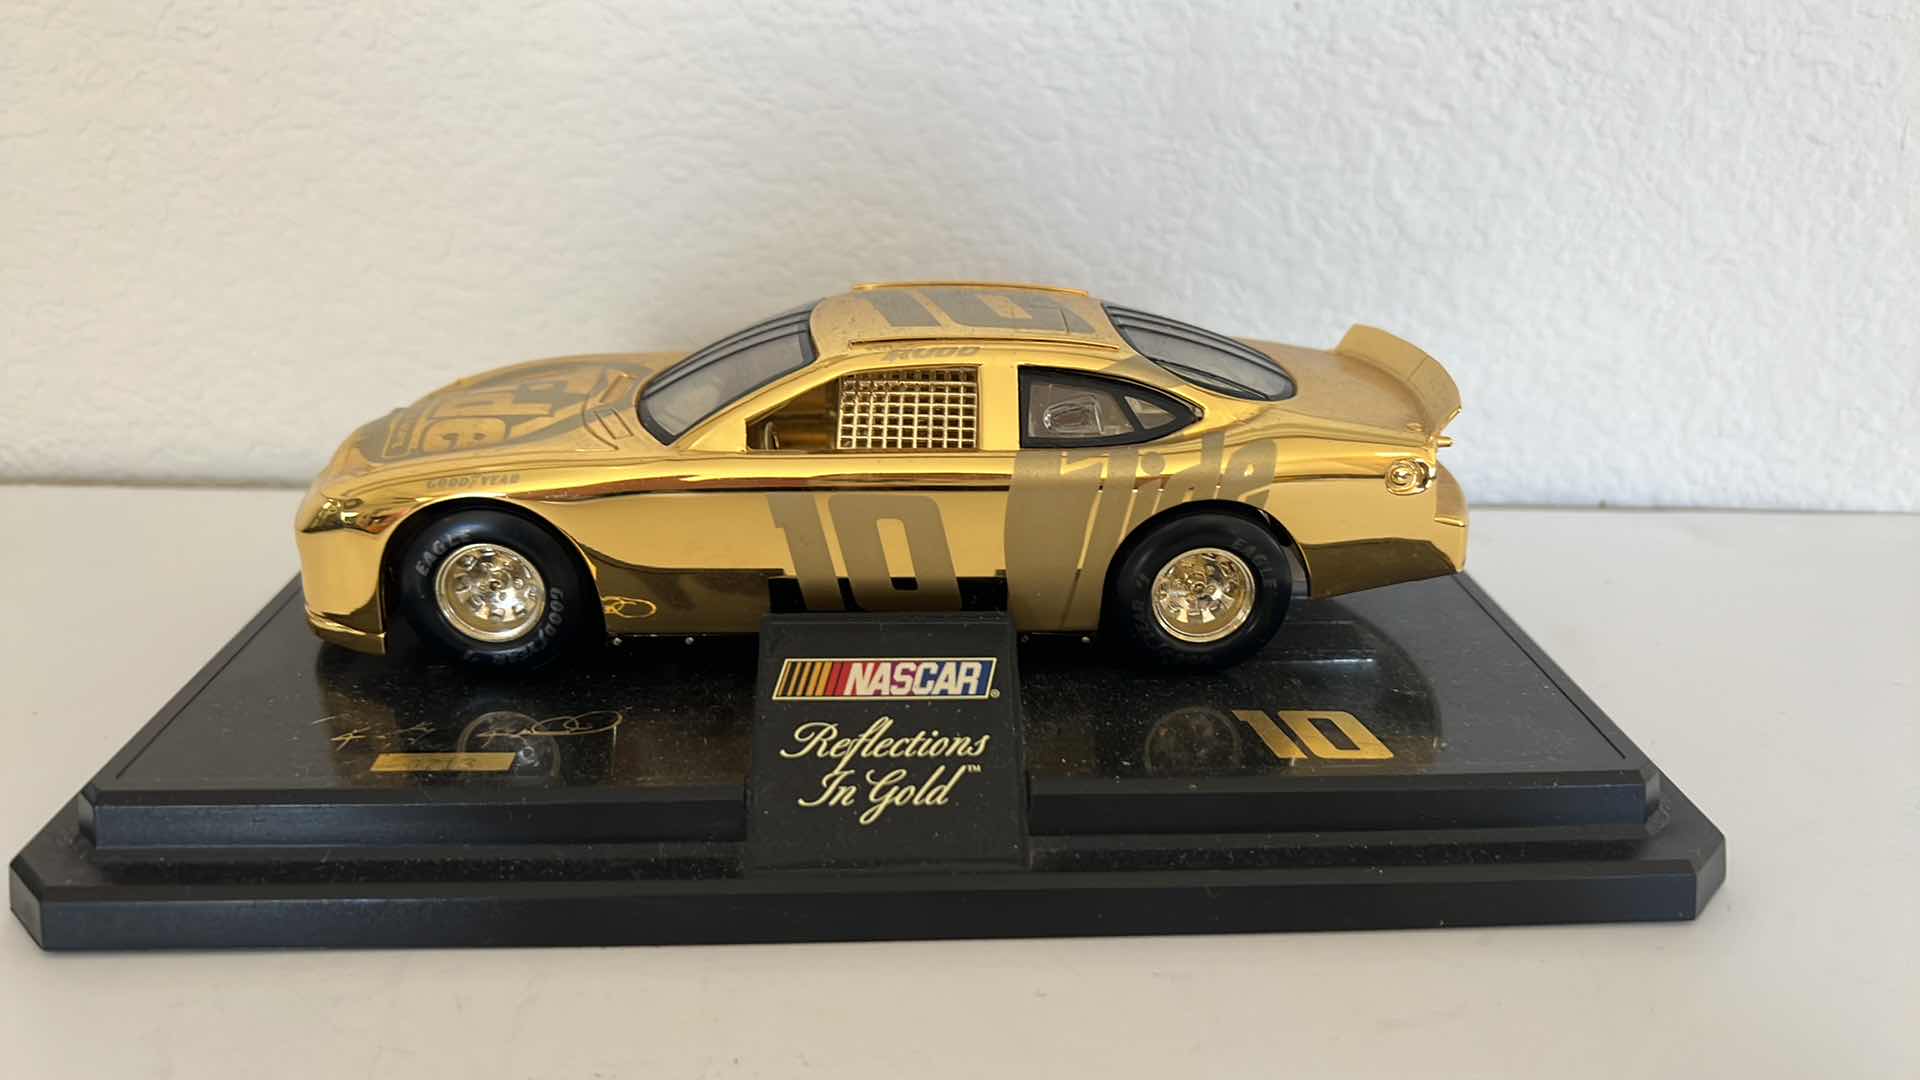 Photo 3 of FORD TAURUS NASCAR “REFLECTIONS IN GOLD” DIE CAST MODEL CAR